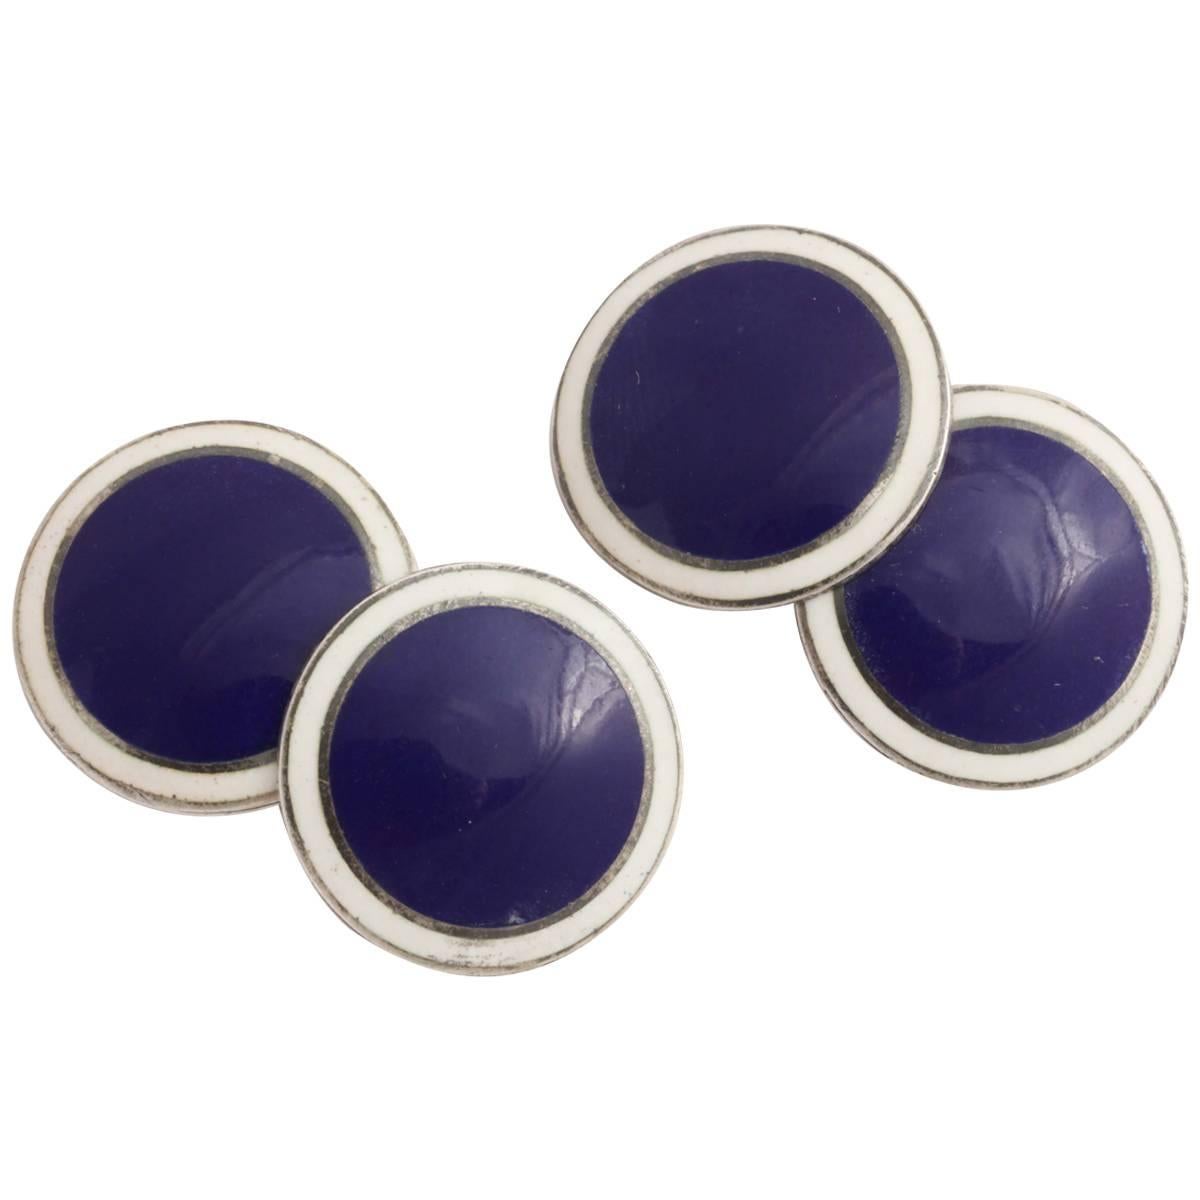 Foster & Bailey American Art Deco Sterling Silver and Guilloche Enamel Cufflinks im Angebot